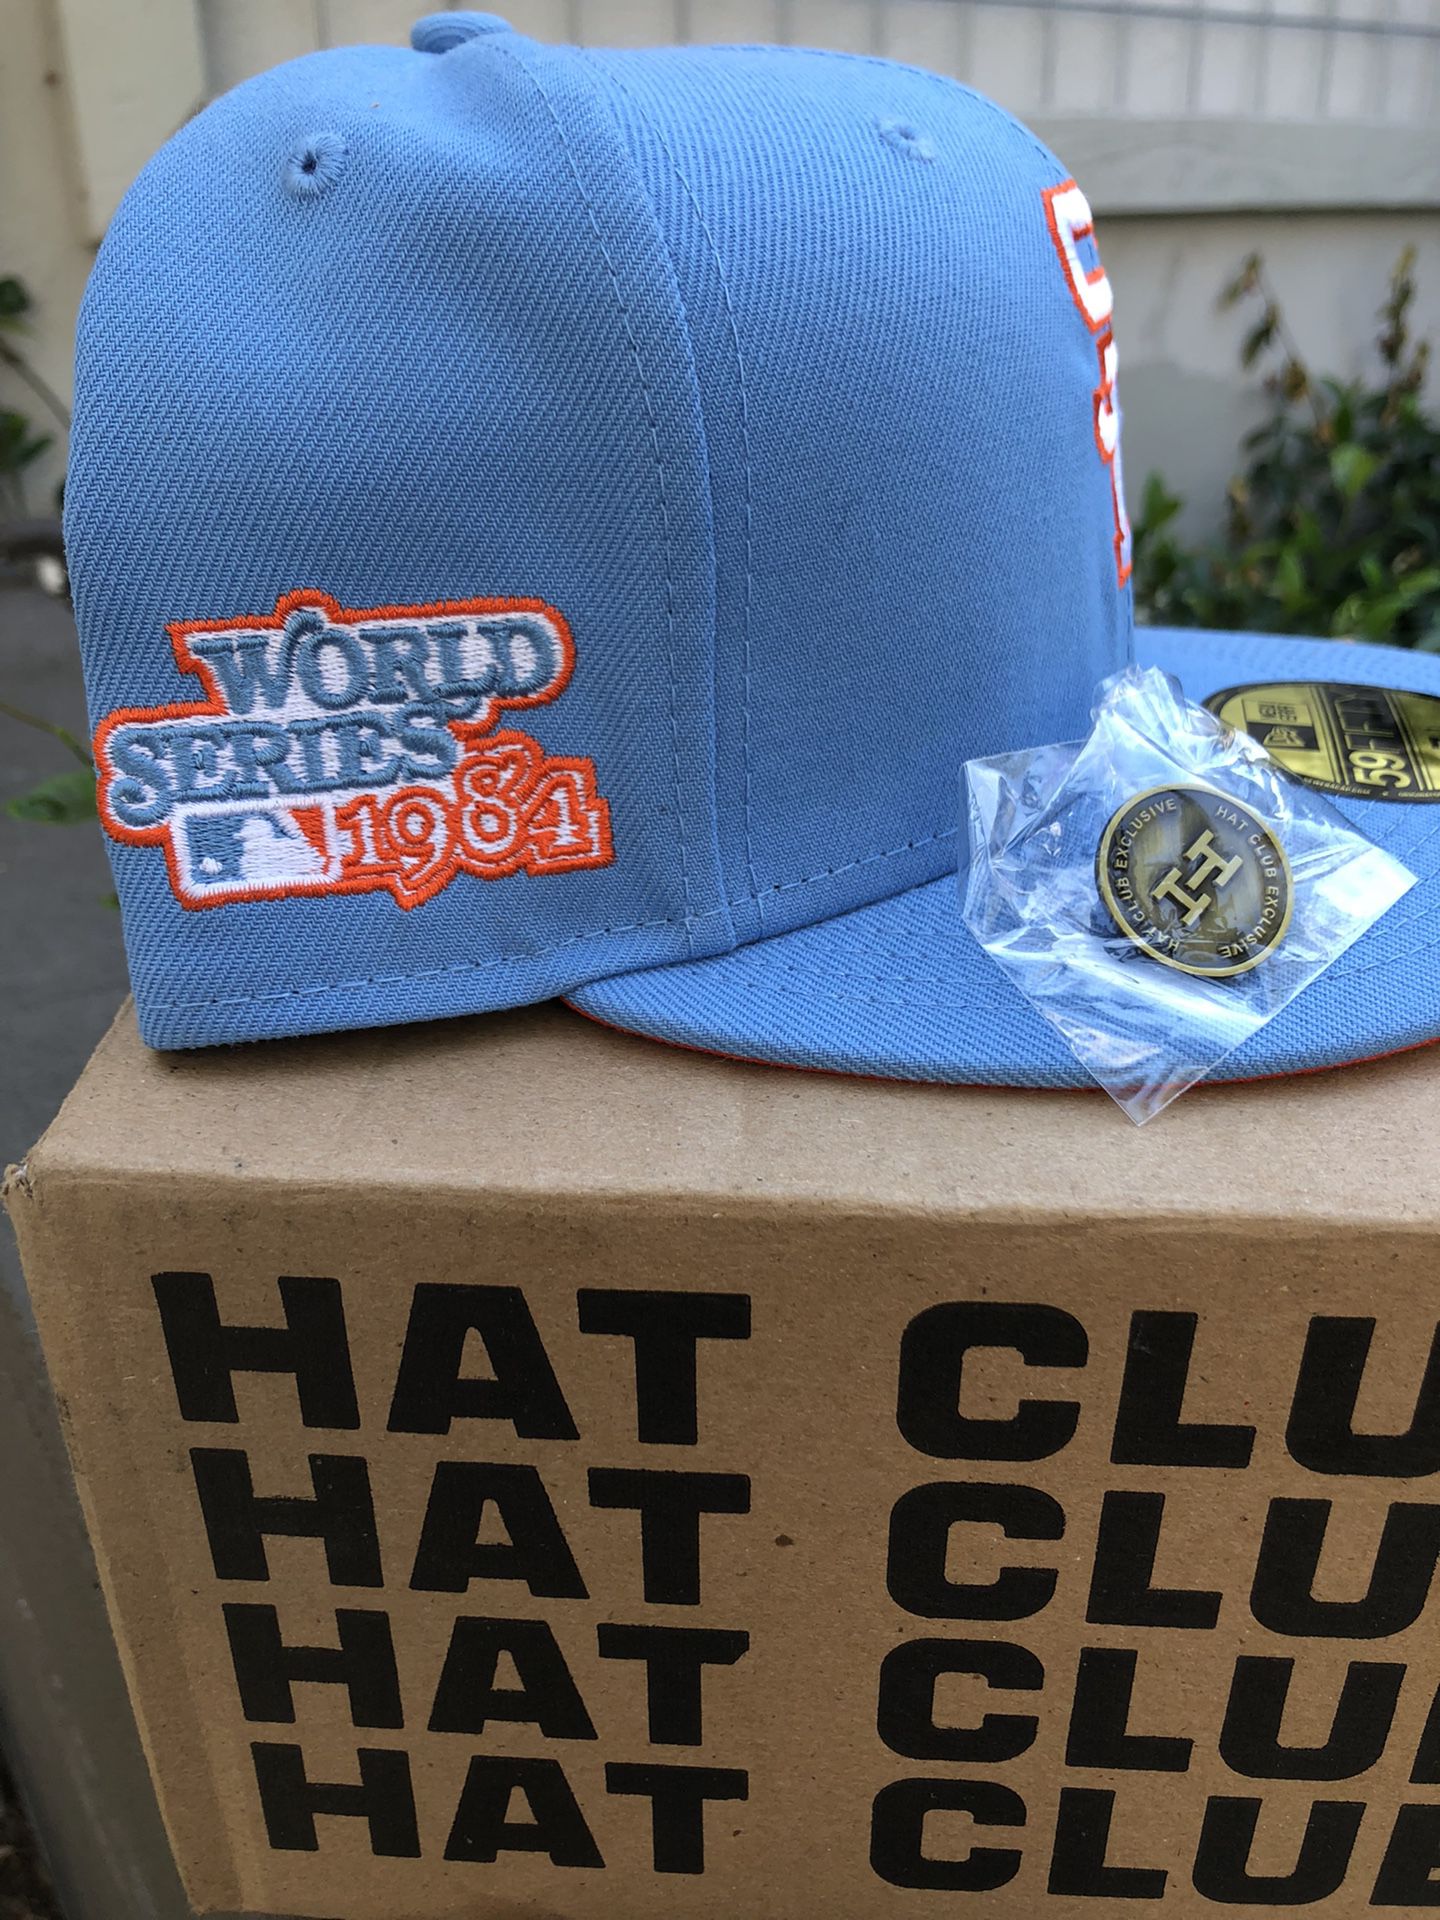 San Diego Padres Bucket Hat for Sale in Chula Vista, CA - OfferUp